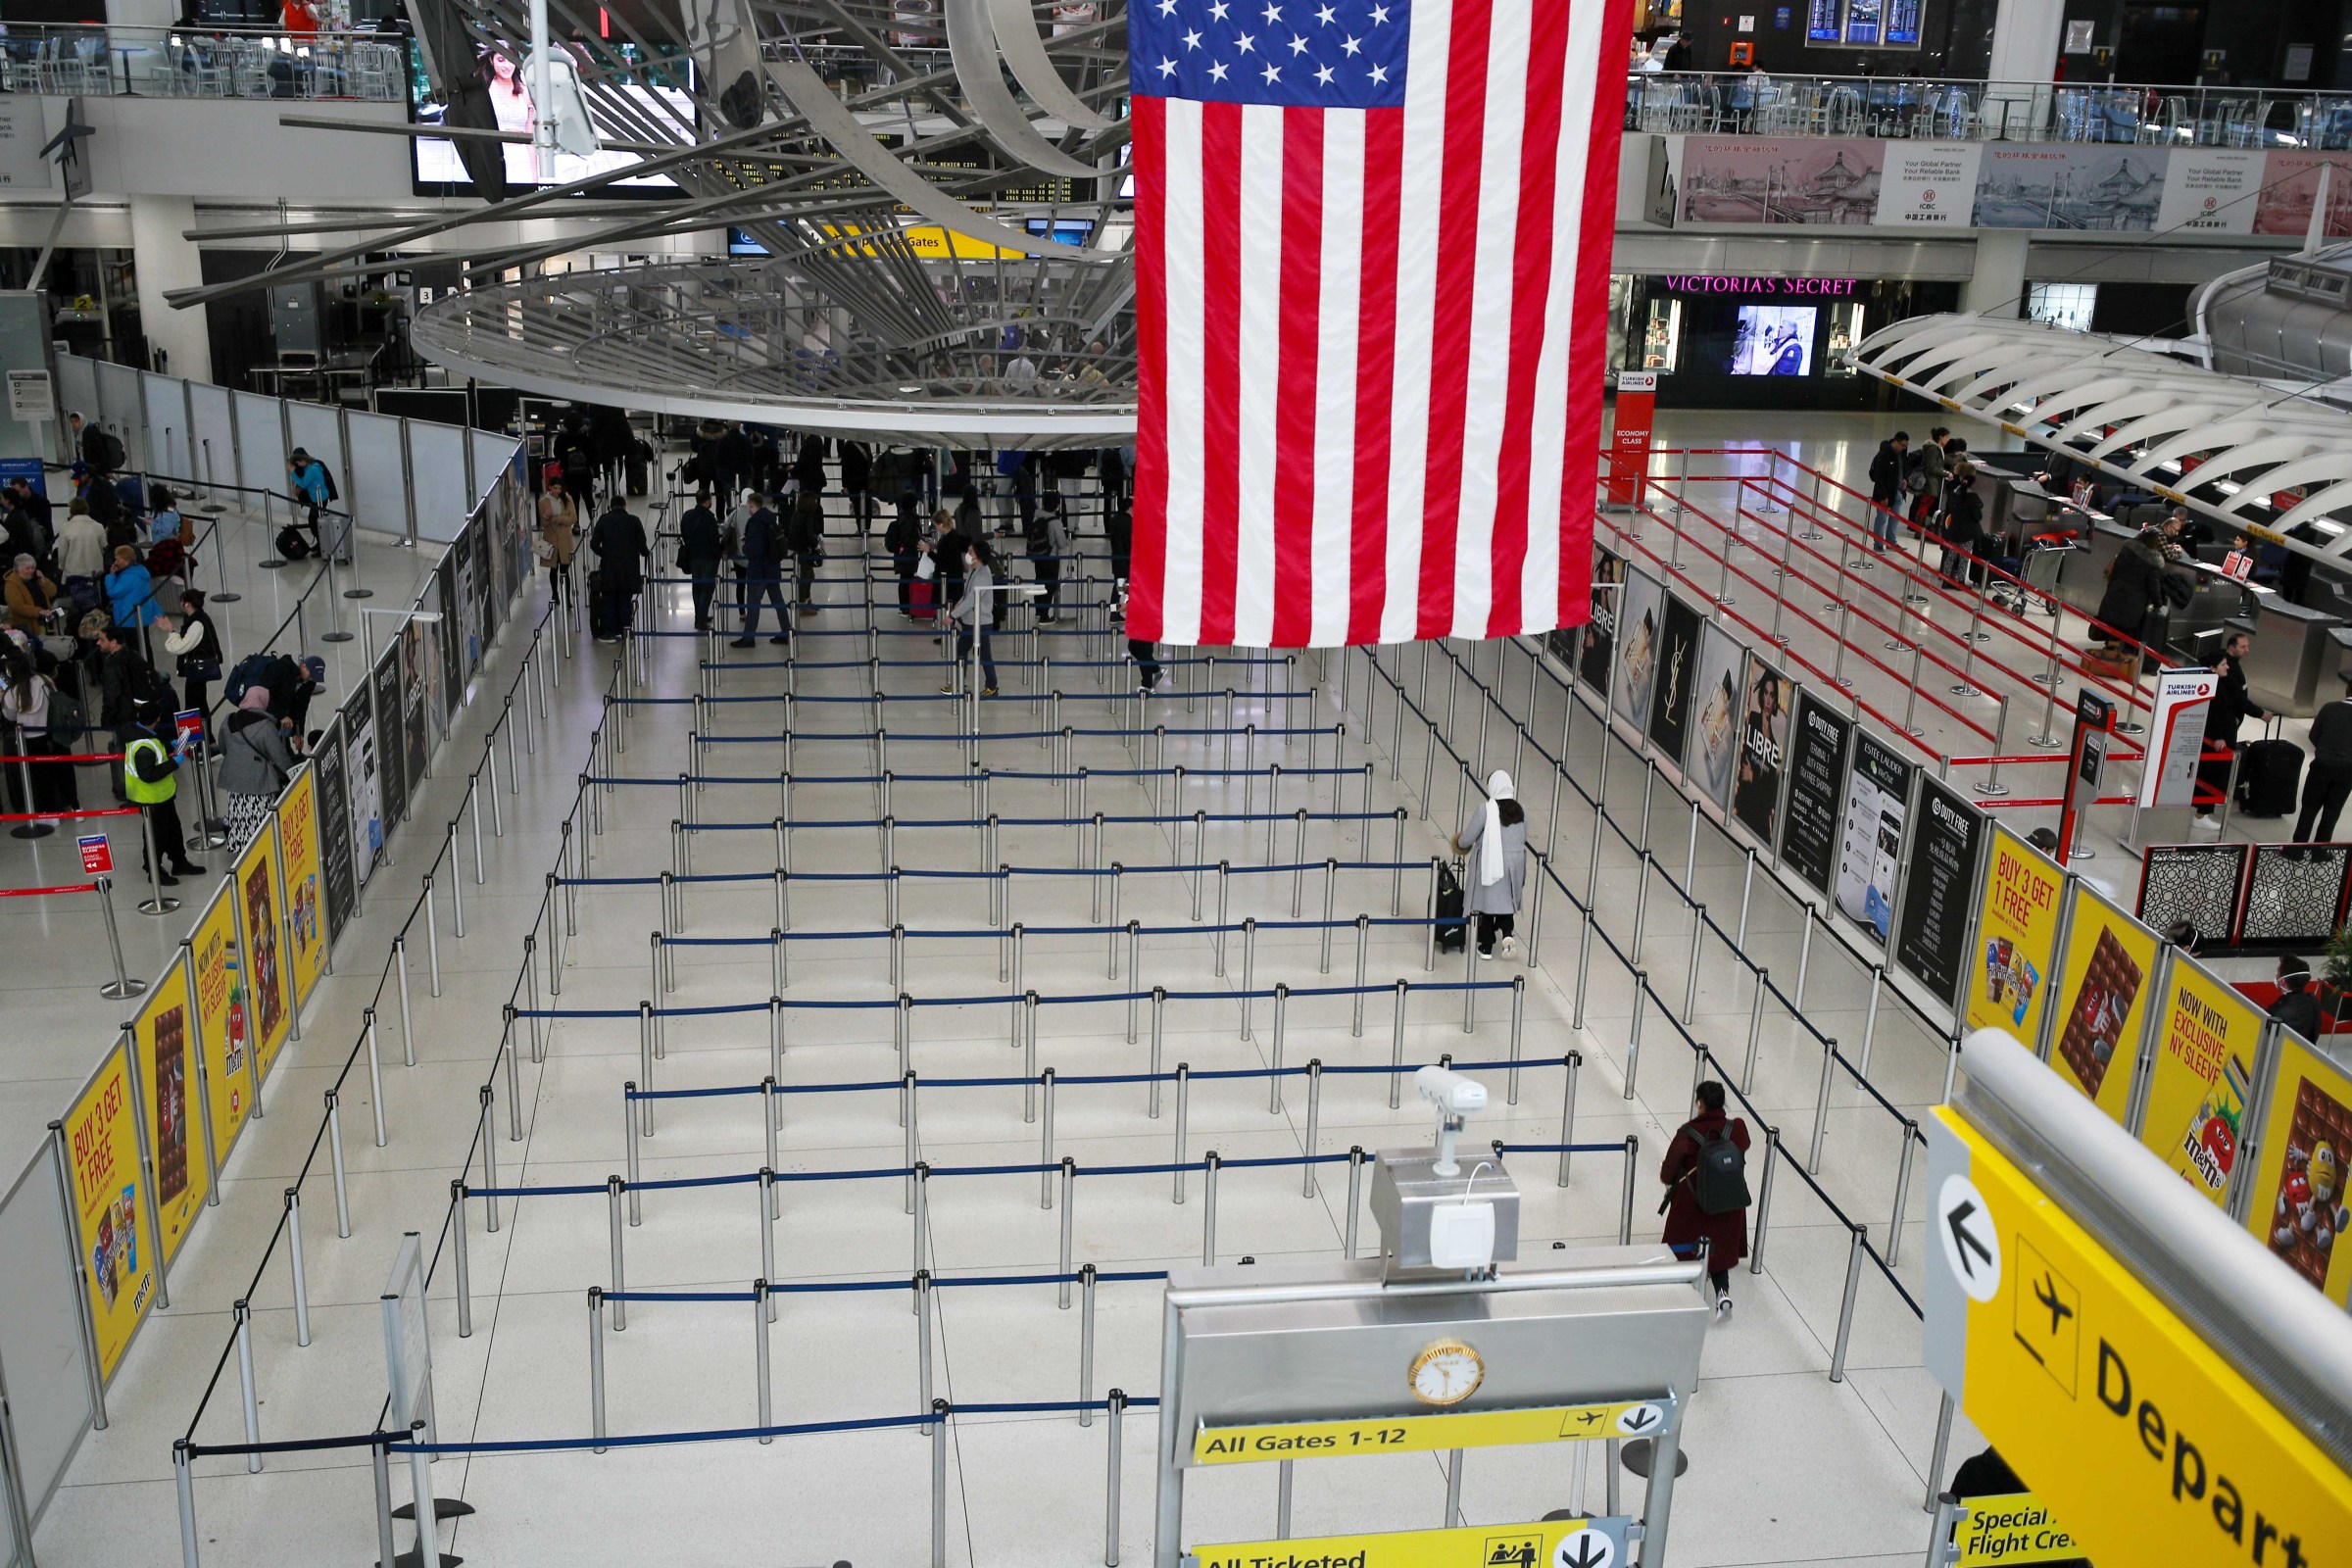 JFK airport in New York City on March 13, two days after President Trump expanded his travel ban to European countries.